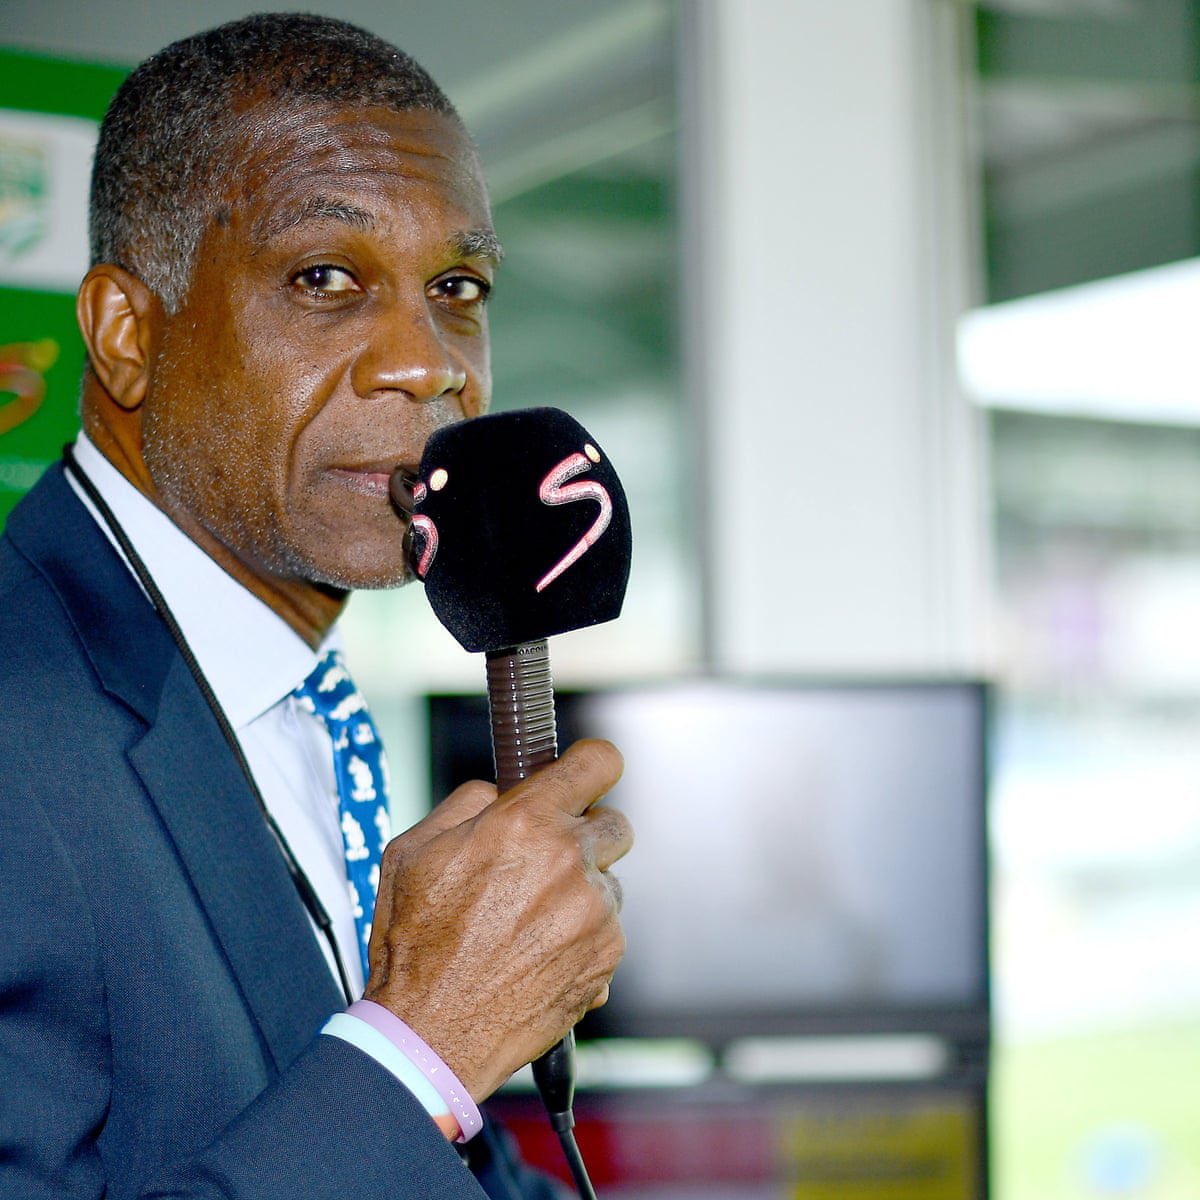 What an episode this week; having Michael Holding as our guest was so very special. AVAILABLE NOW ON ALL PODCAST PLATFORMS - don’t miss this one.